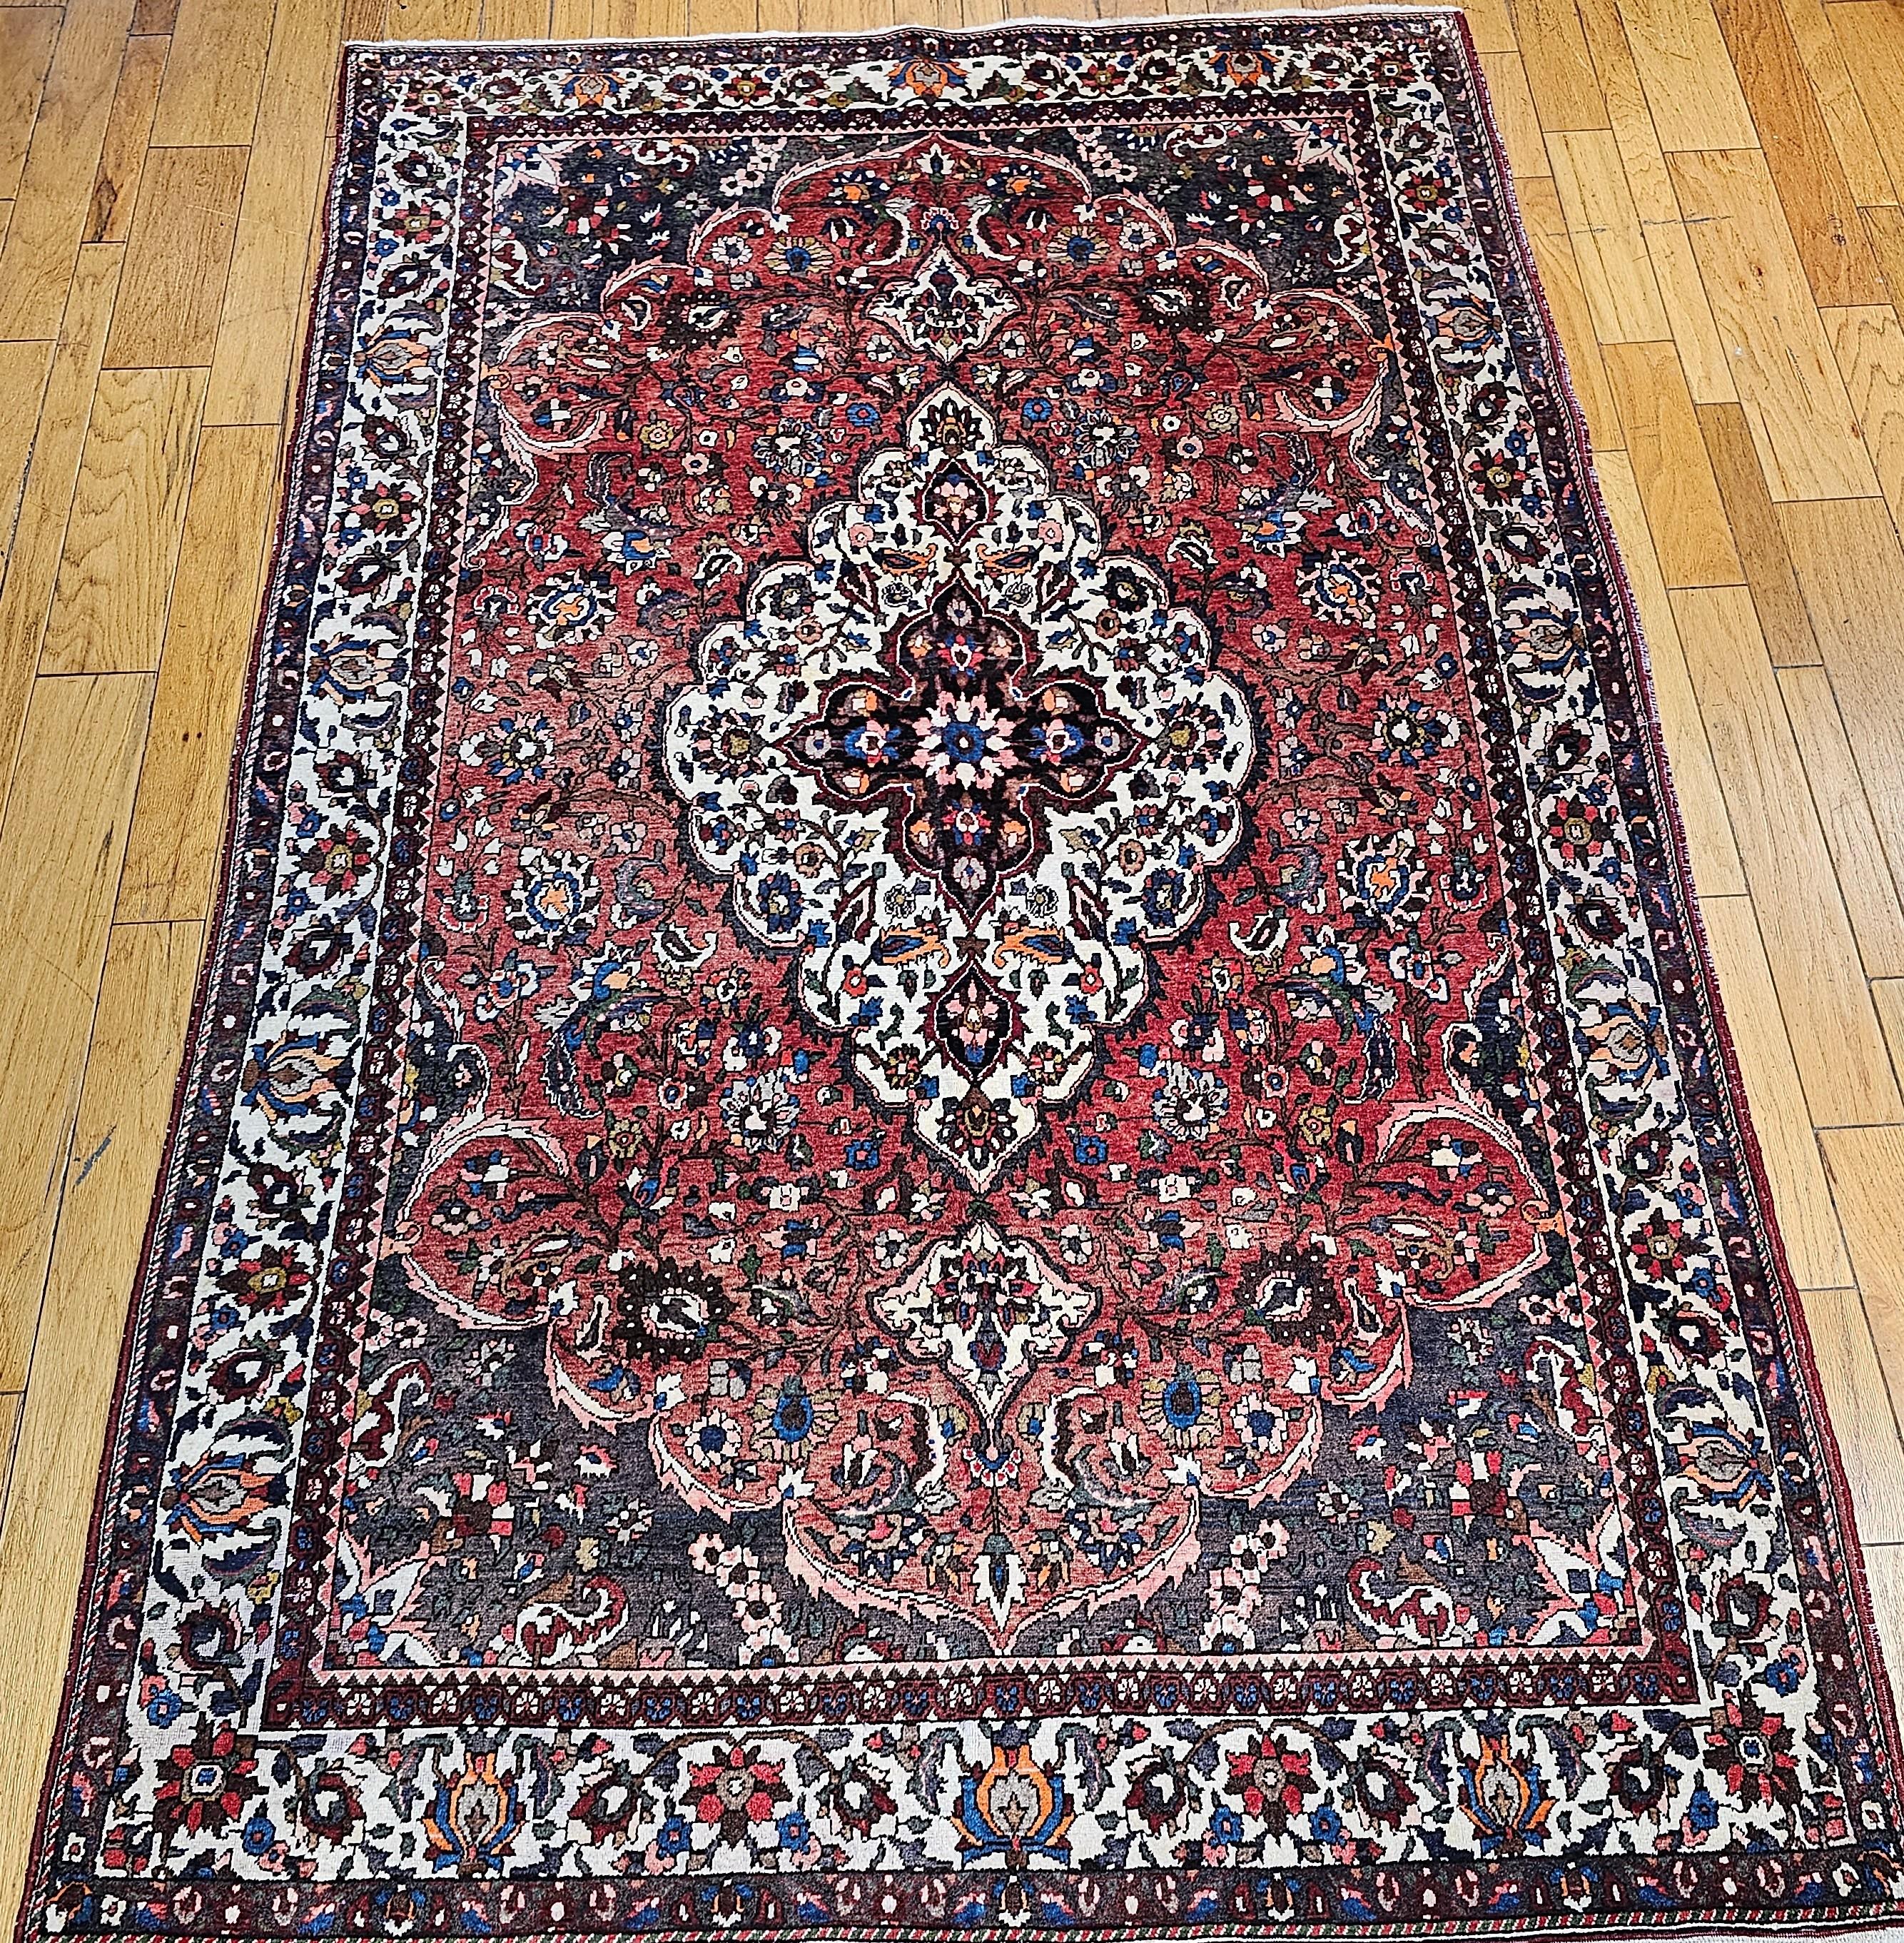 Room-size Persian Bakhtiari tribal rug from the Western Persia in a medallion floral pattern from the mid 1900s. A large central medallion is in a cream background color. Bakhtiari rugs are renowned for their beautiful floral designs and the use of